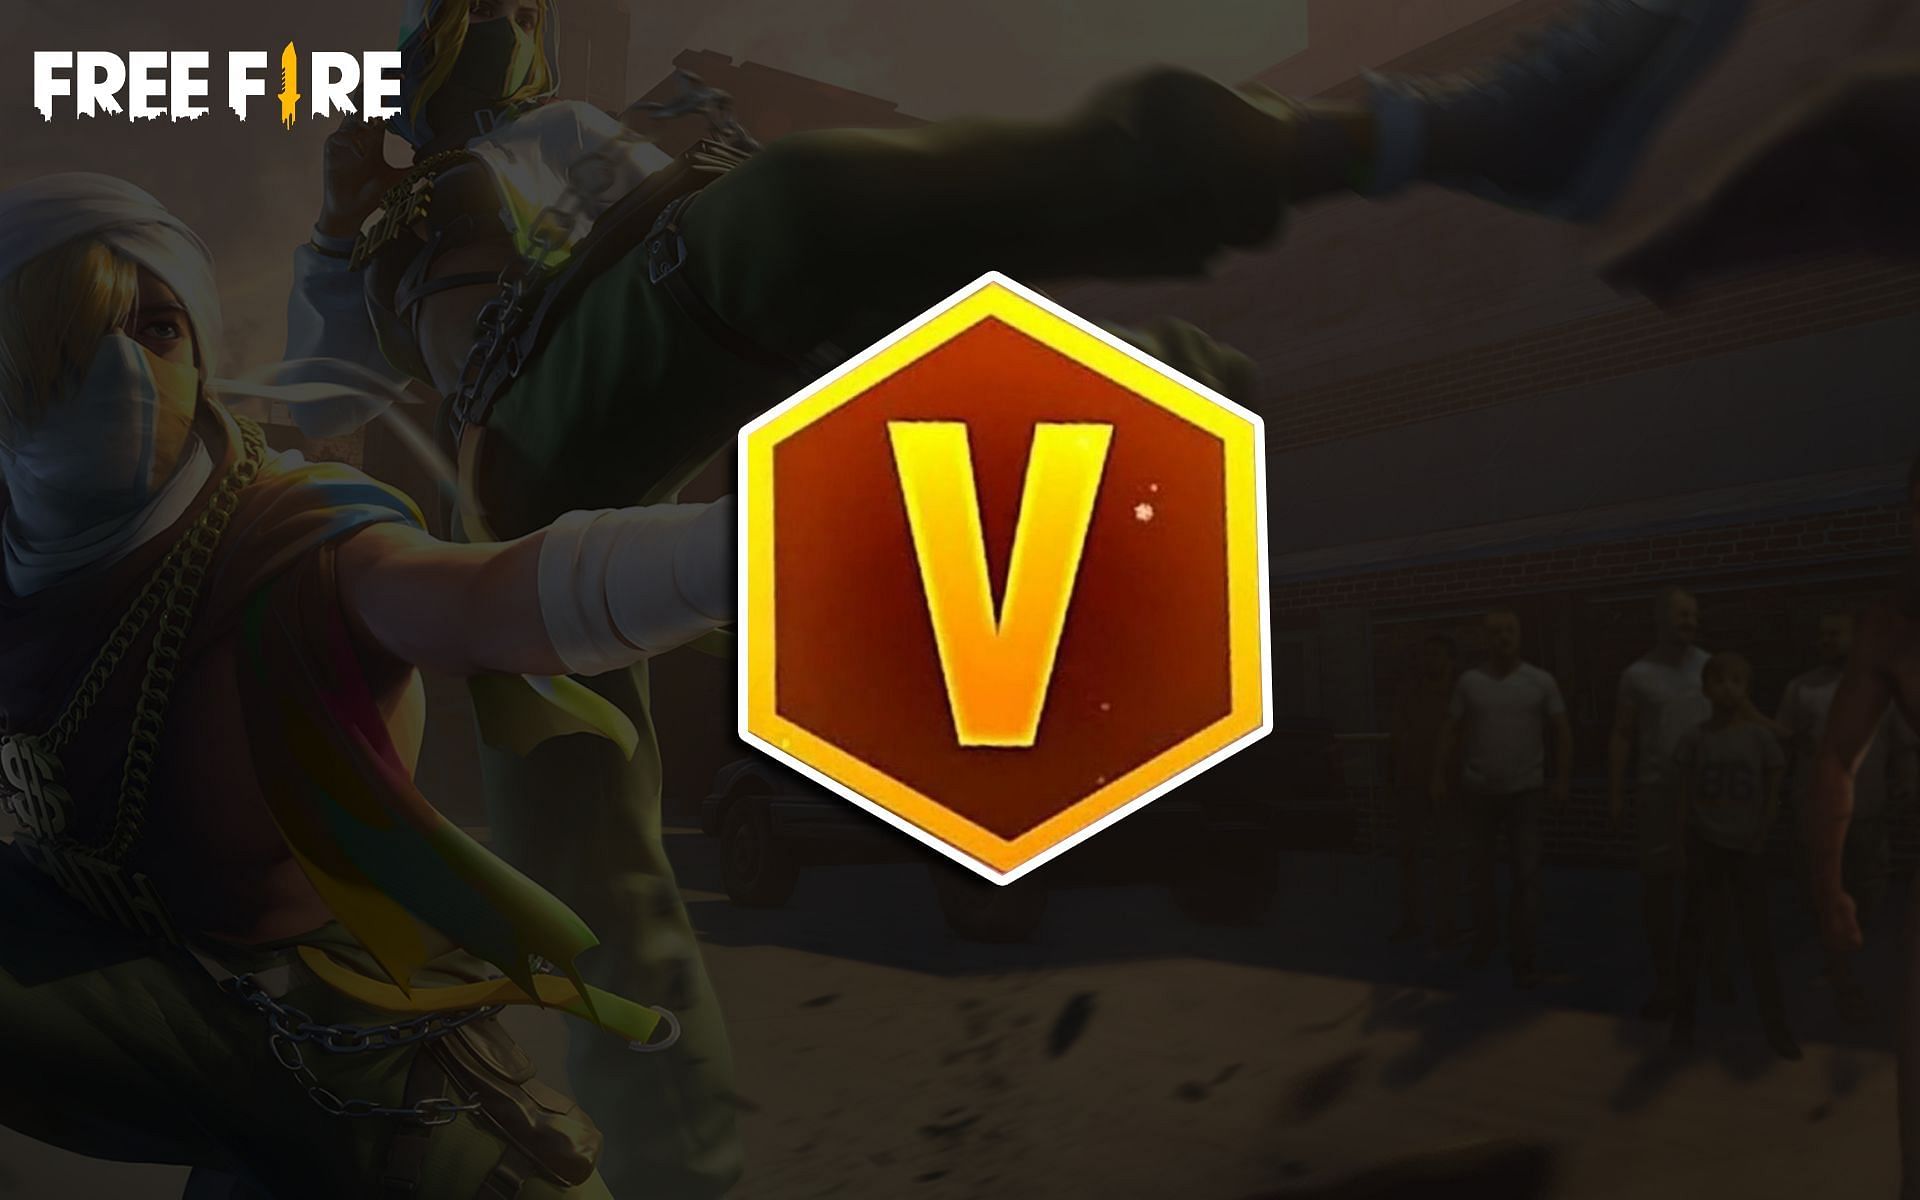 V Badge can be received in Free Fire through the Partner Program (Image via Sportskeeda)